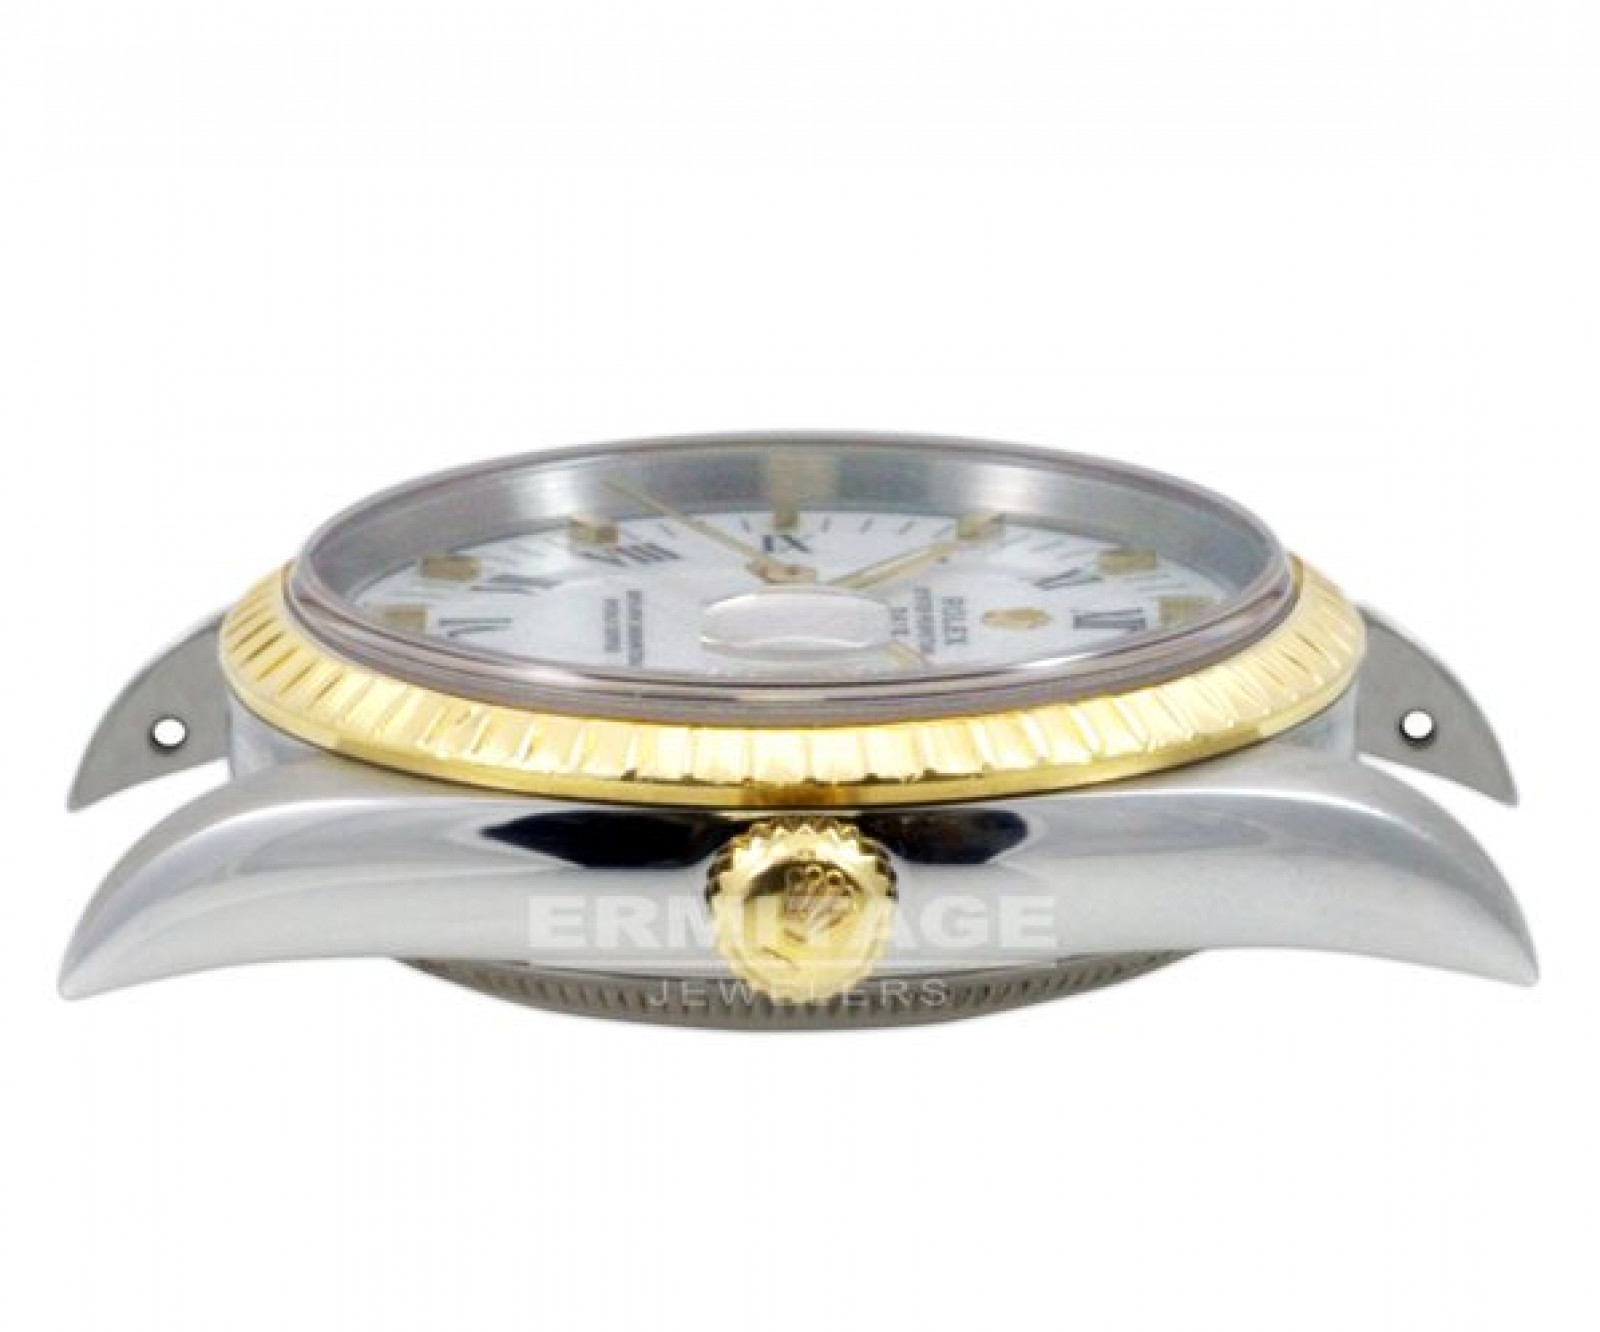 Pre-Owned Rolex Date 15223 Gold & Steel